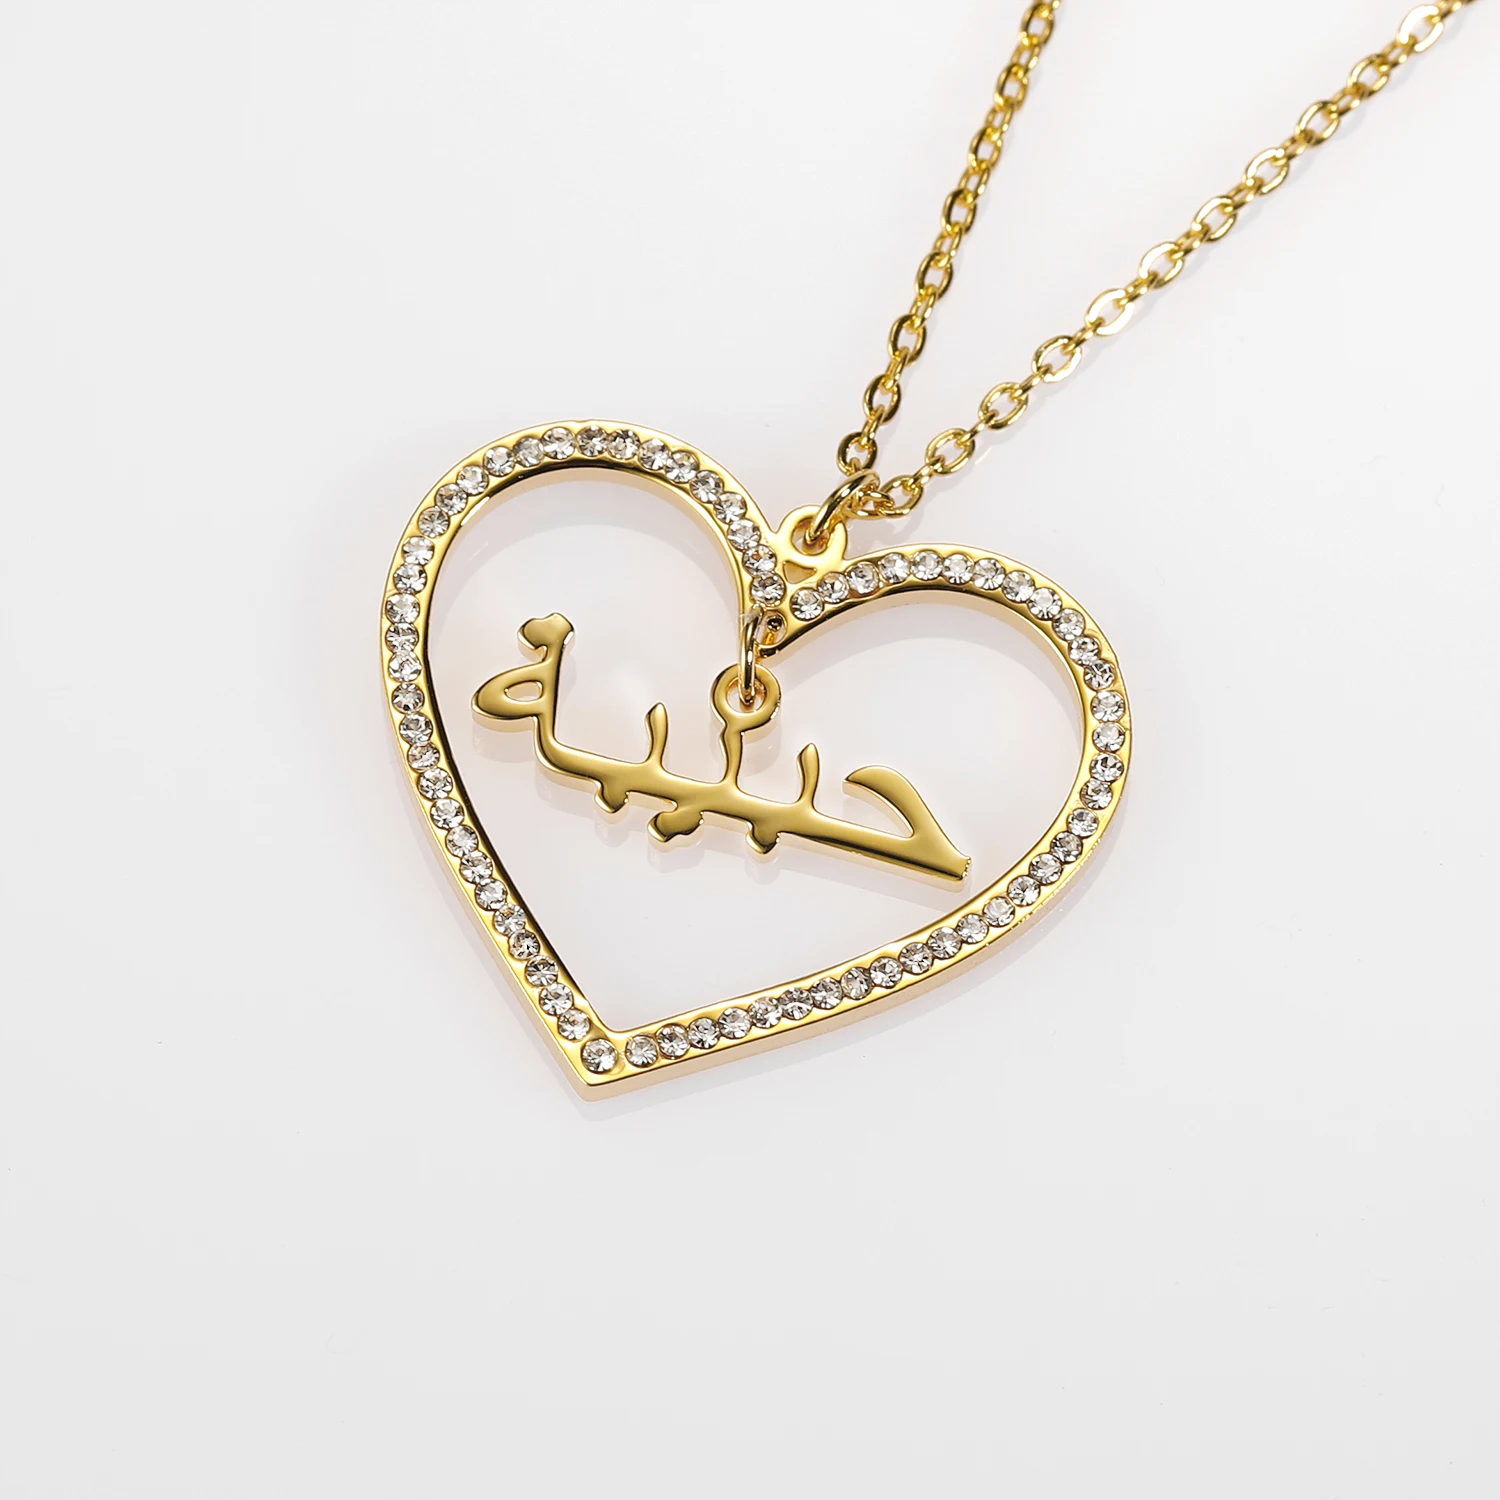 Custom Arabic Name Necklaces Love Heart Crystal  Pendant For Women Personalized Gold Chain Islamic Jewelry Birthday Gift